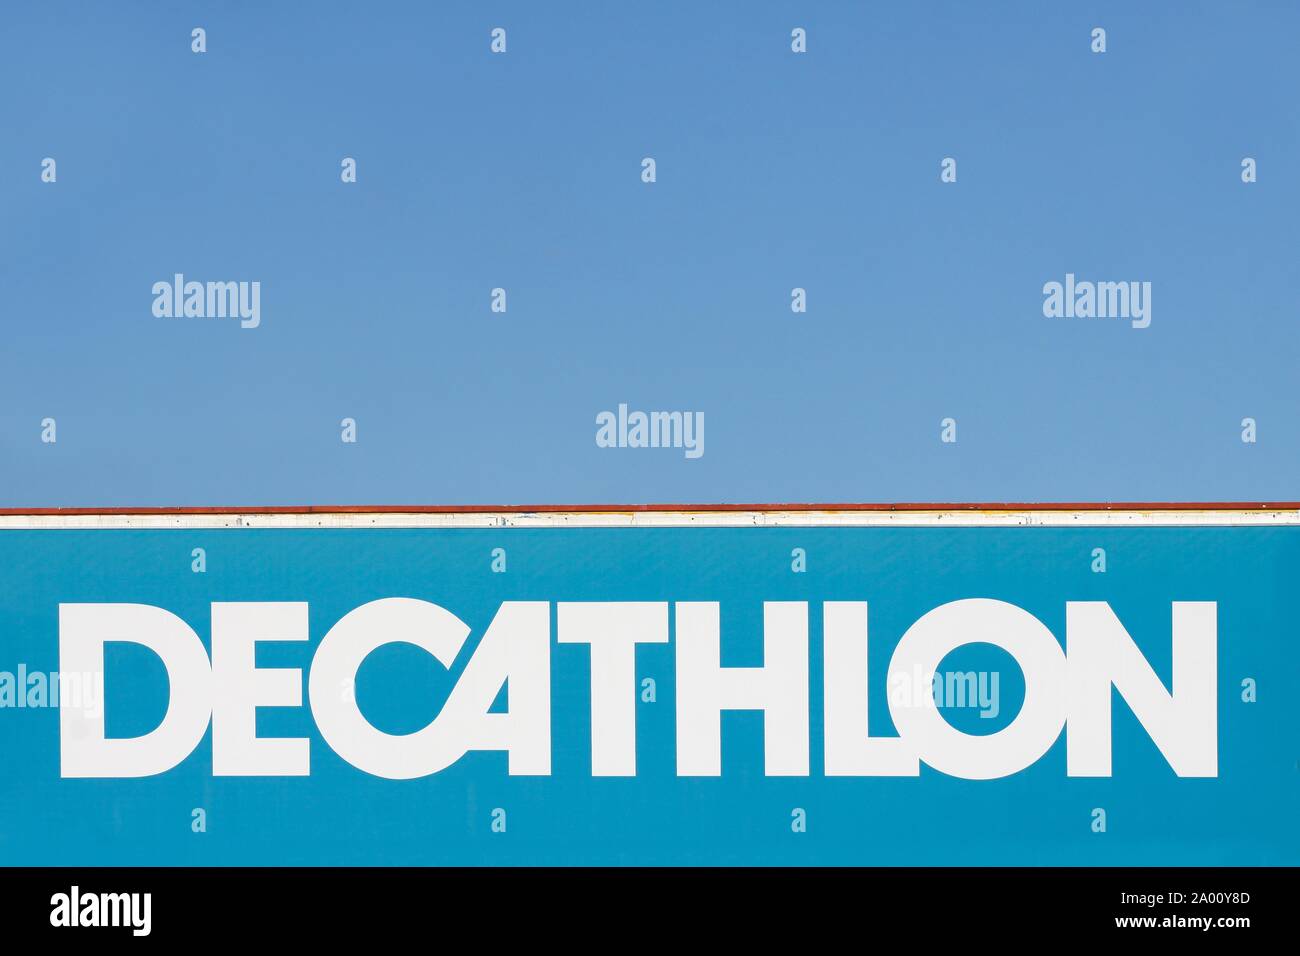 Lyon, France - July 27, 2015: Decathlon sign on a wall. Decathlon is a french company and one of the world's largest sporting goods Stock Photo